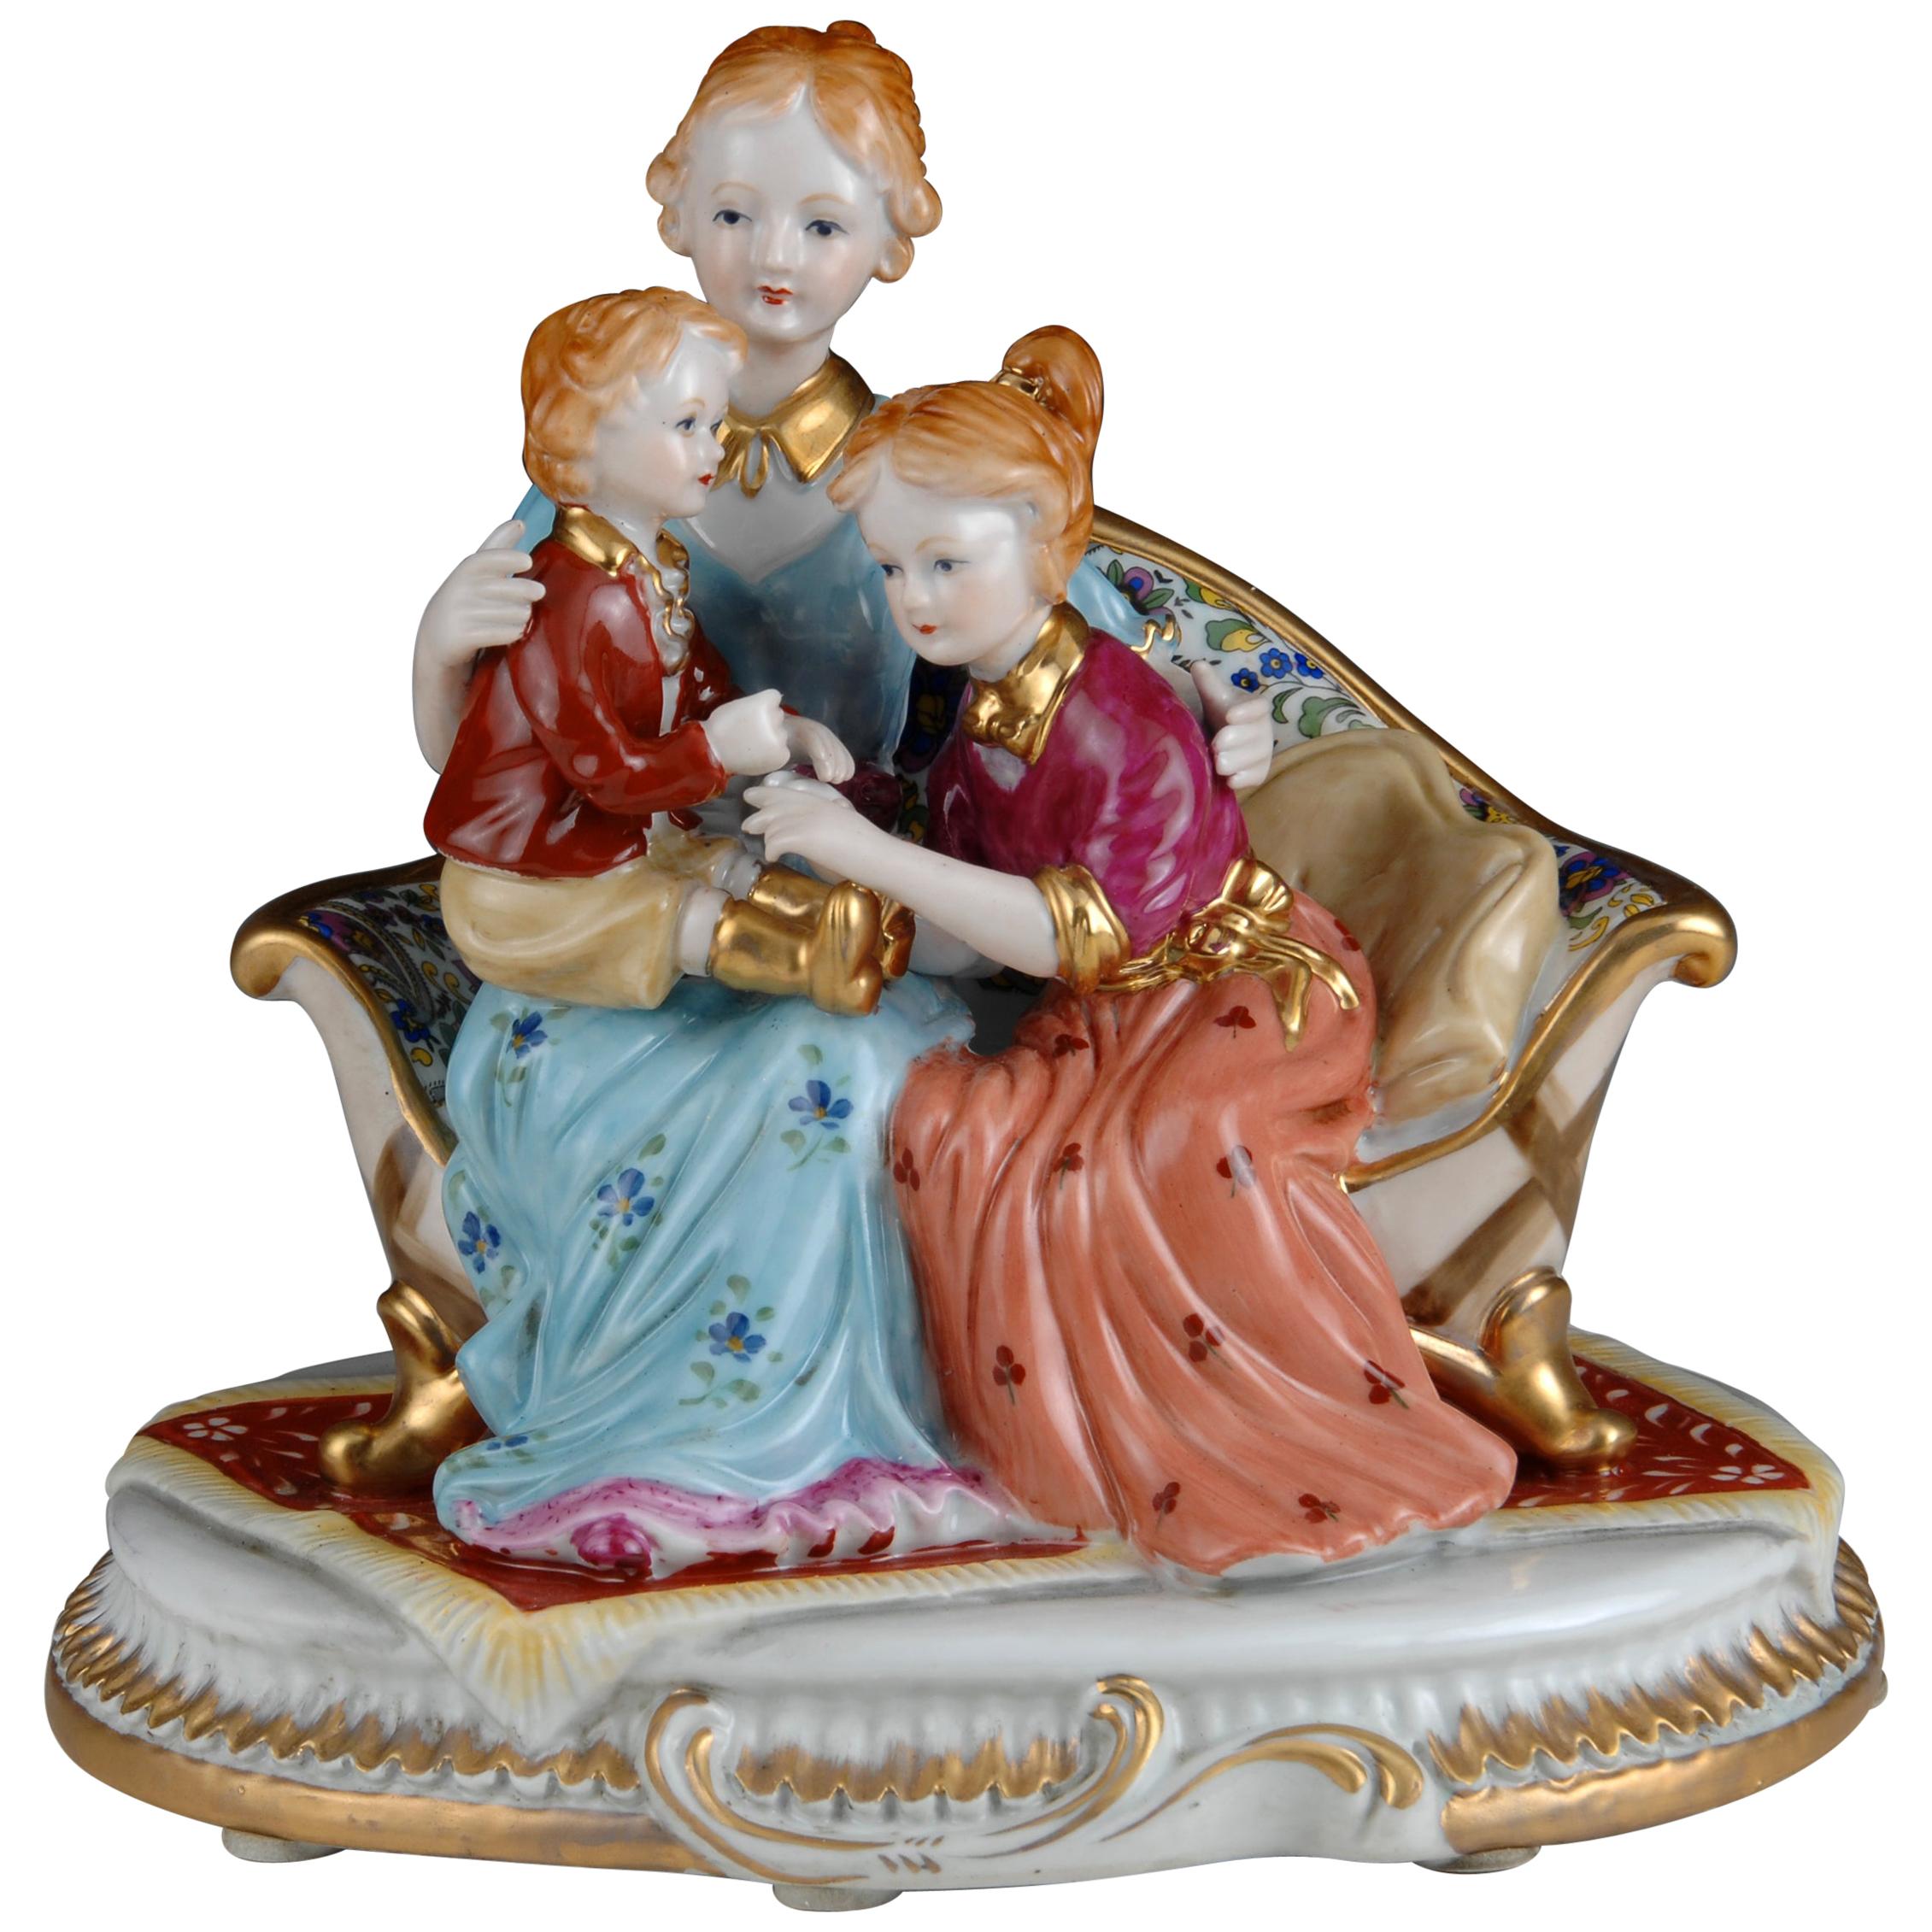 Family Time, Porcelain, after Models from Sèvres, 20th Century